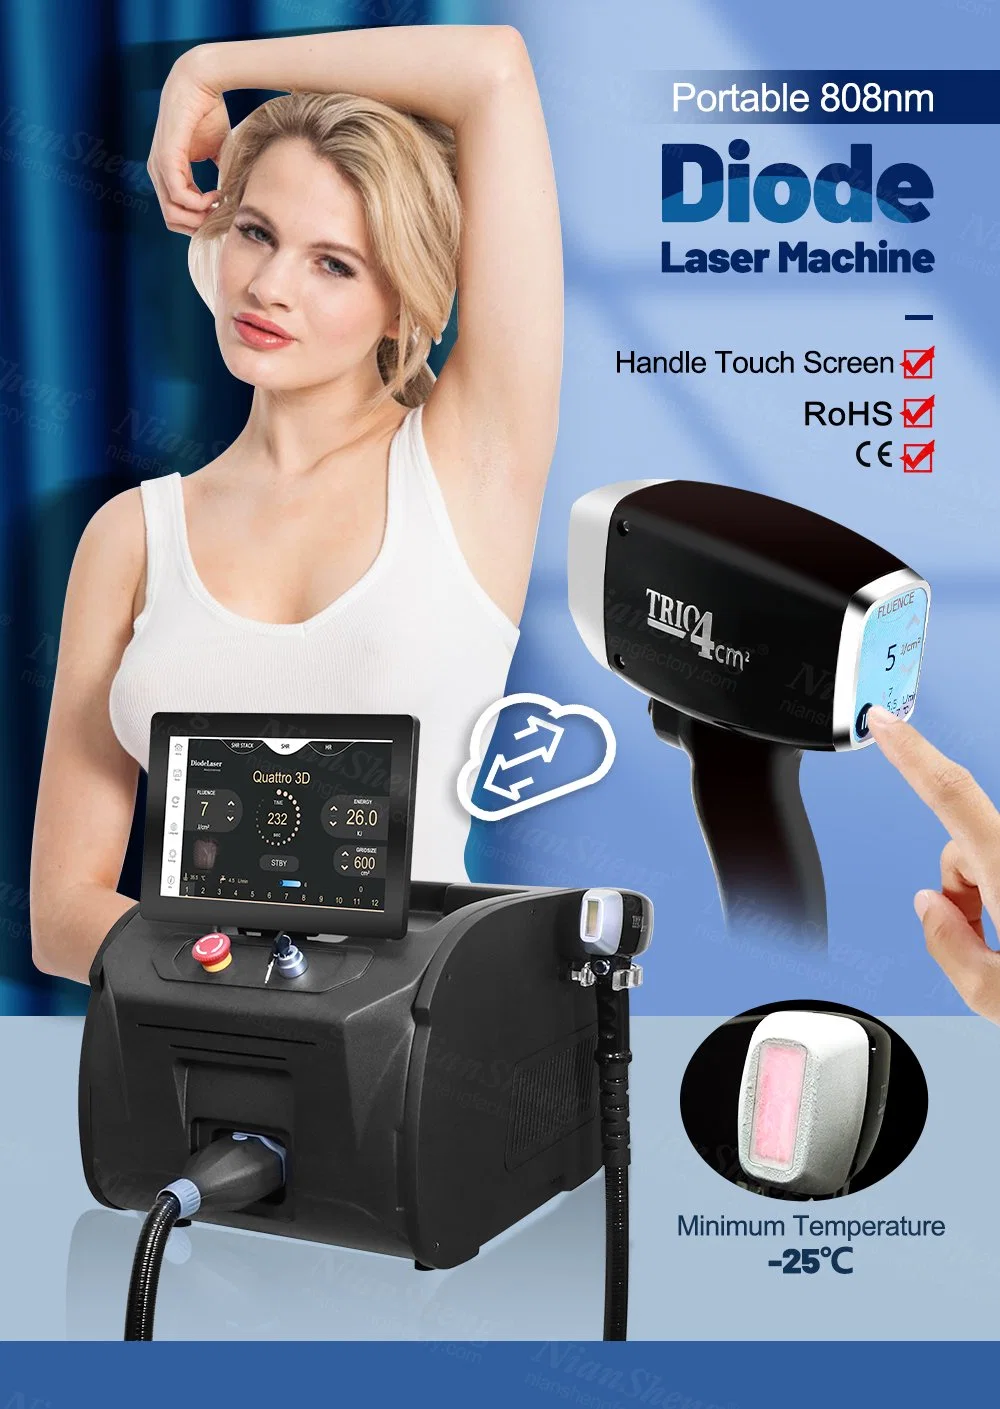 Portable Professional Technical 808nm Hair Removal Diode Laser Beauty Equipment